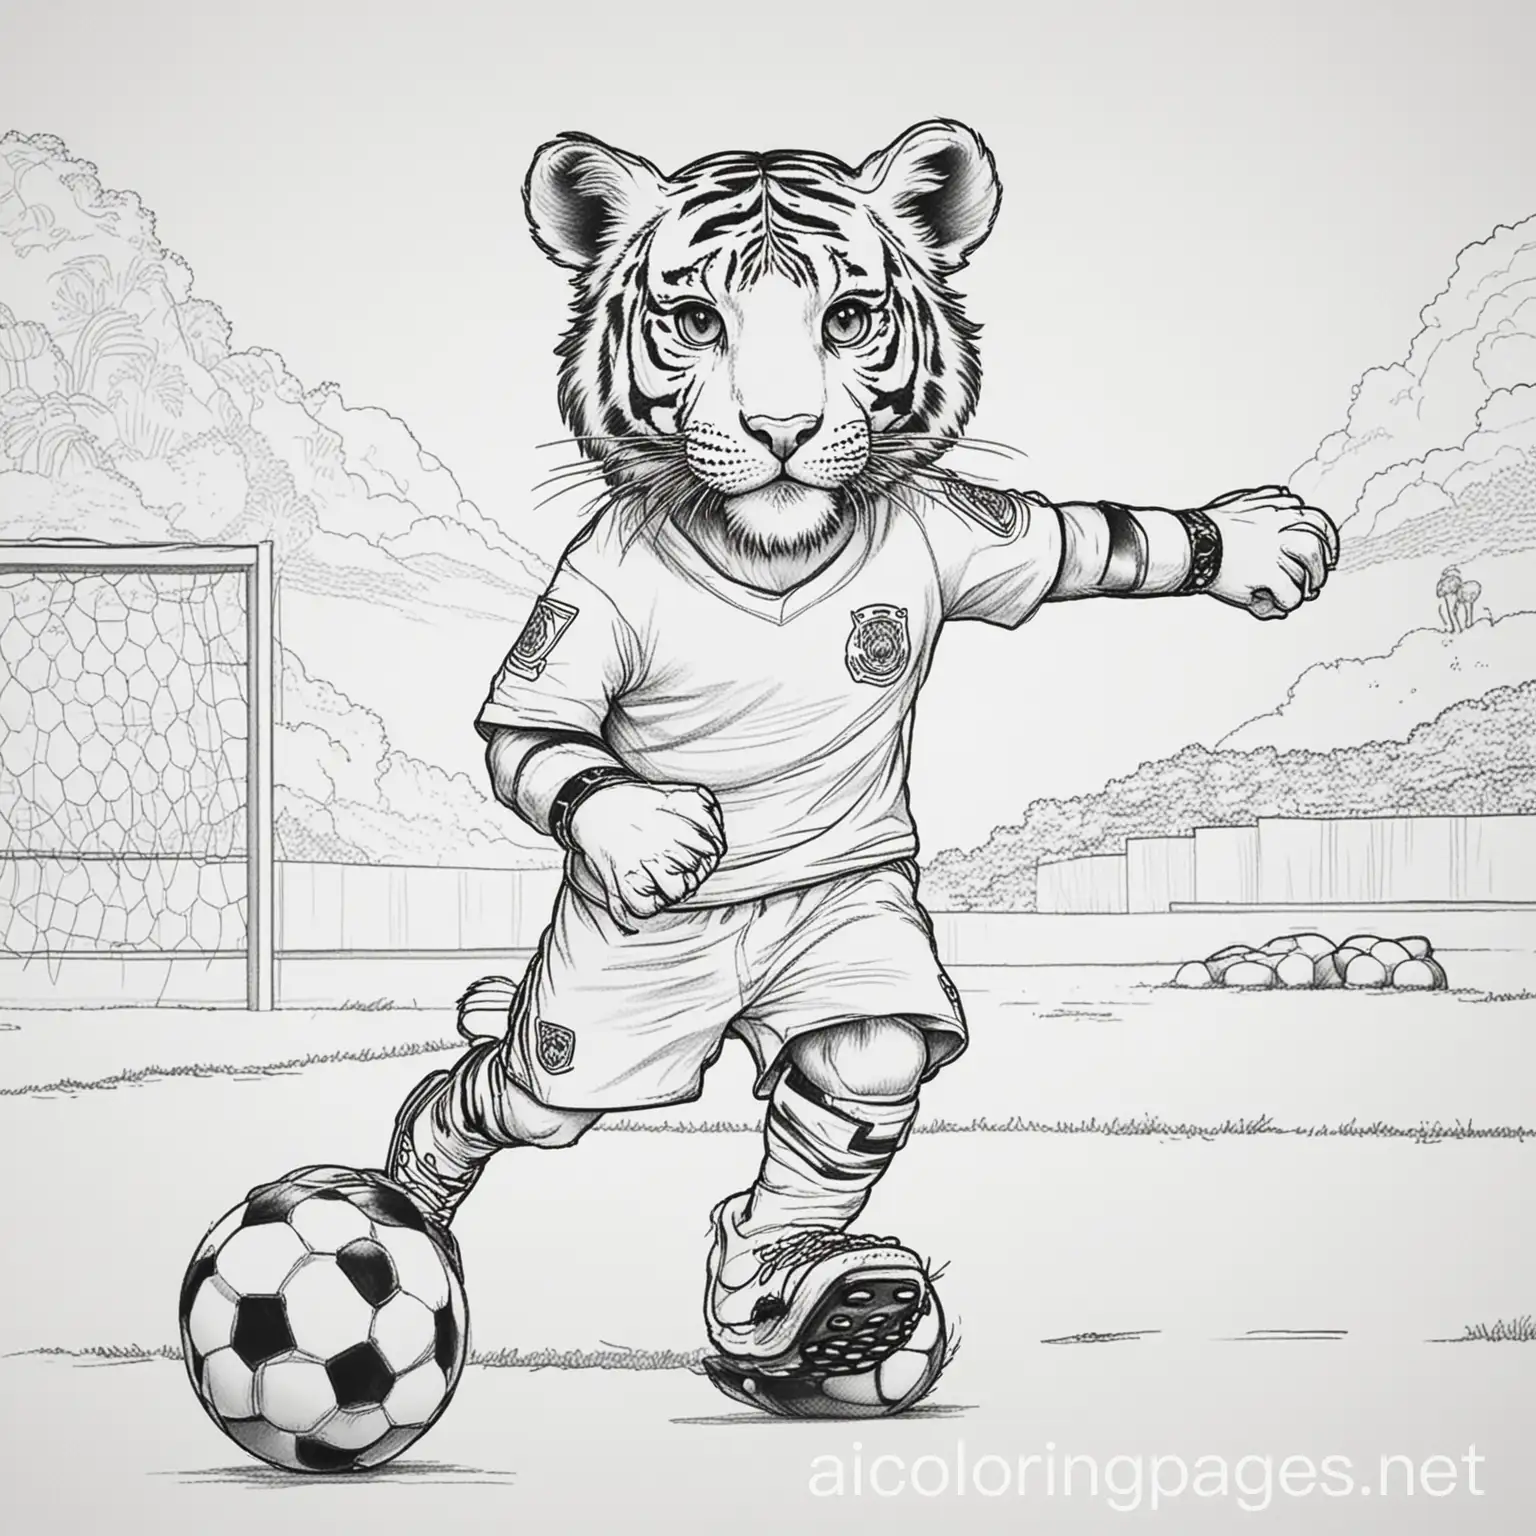 tiger playing soccer in mexico, Coloring Page, black and white, line art, white background, Simplicity, Ample White Space. The background of the coloring page is plain white to make it easy for young children to color within the lines. The outlines of all the subjects are easy to distinguish, making it simple for kids to color without too much difficulty